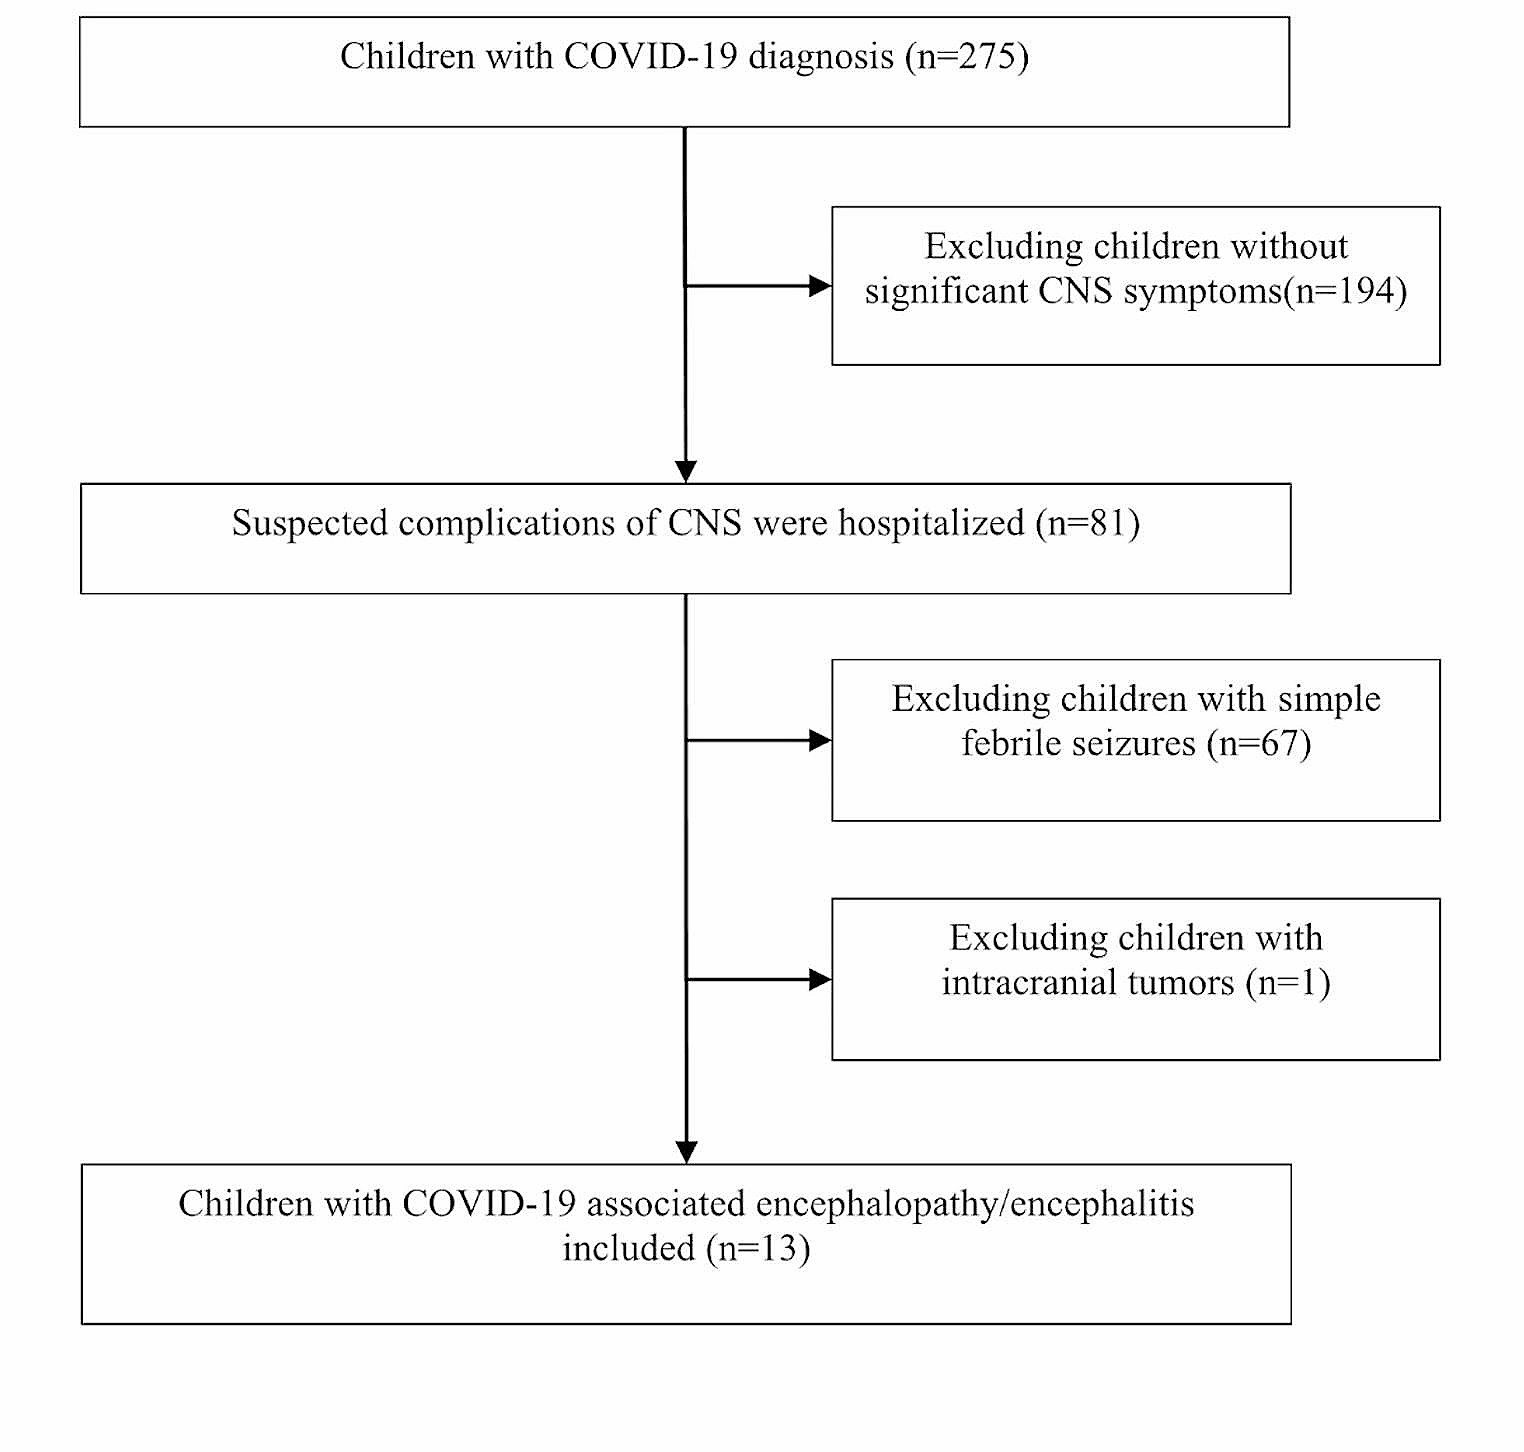 Clinical characteristics and outcomes of COVID-19-associated encephalopathy in children